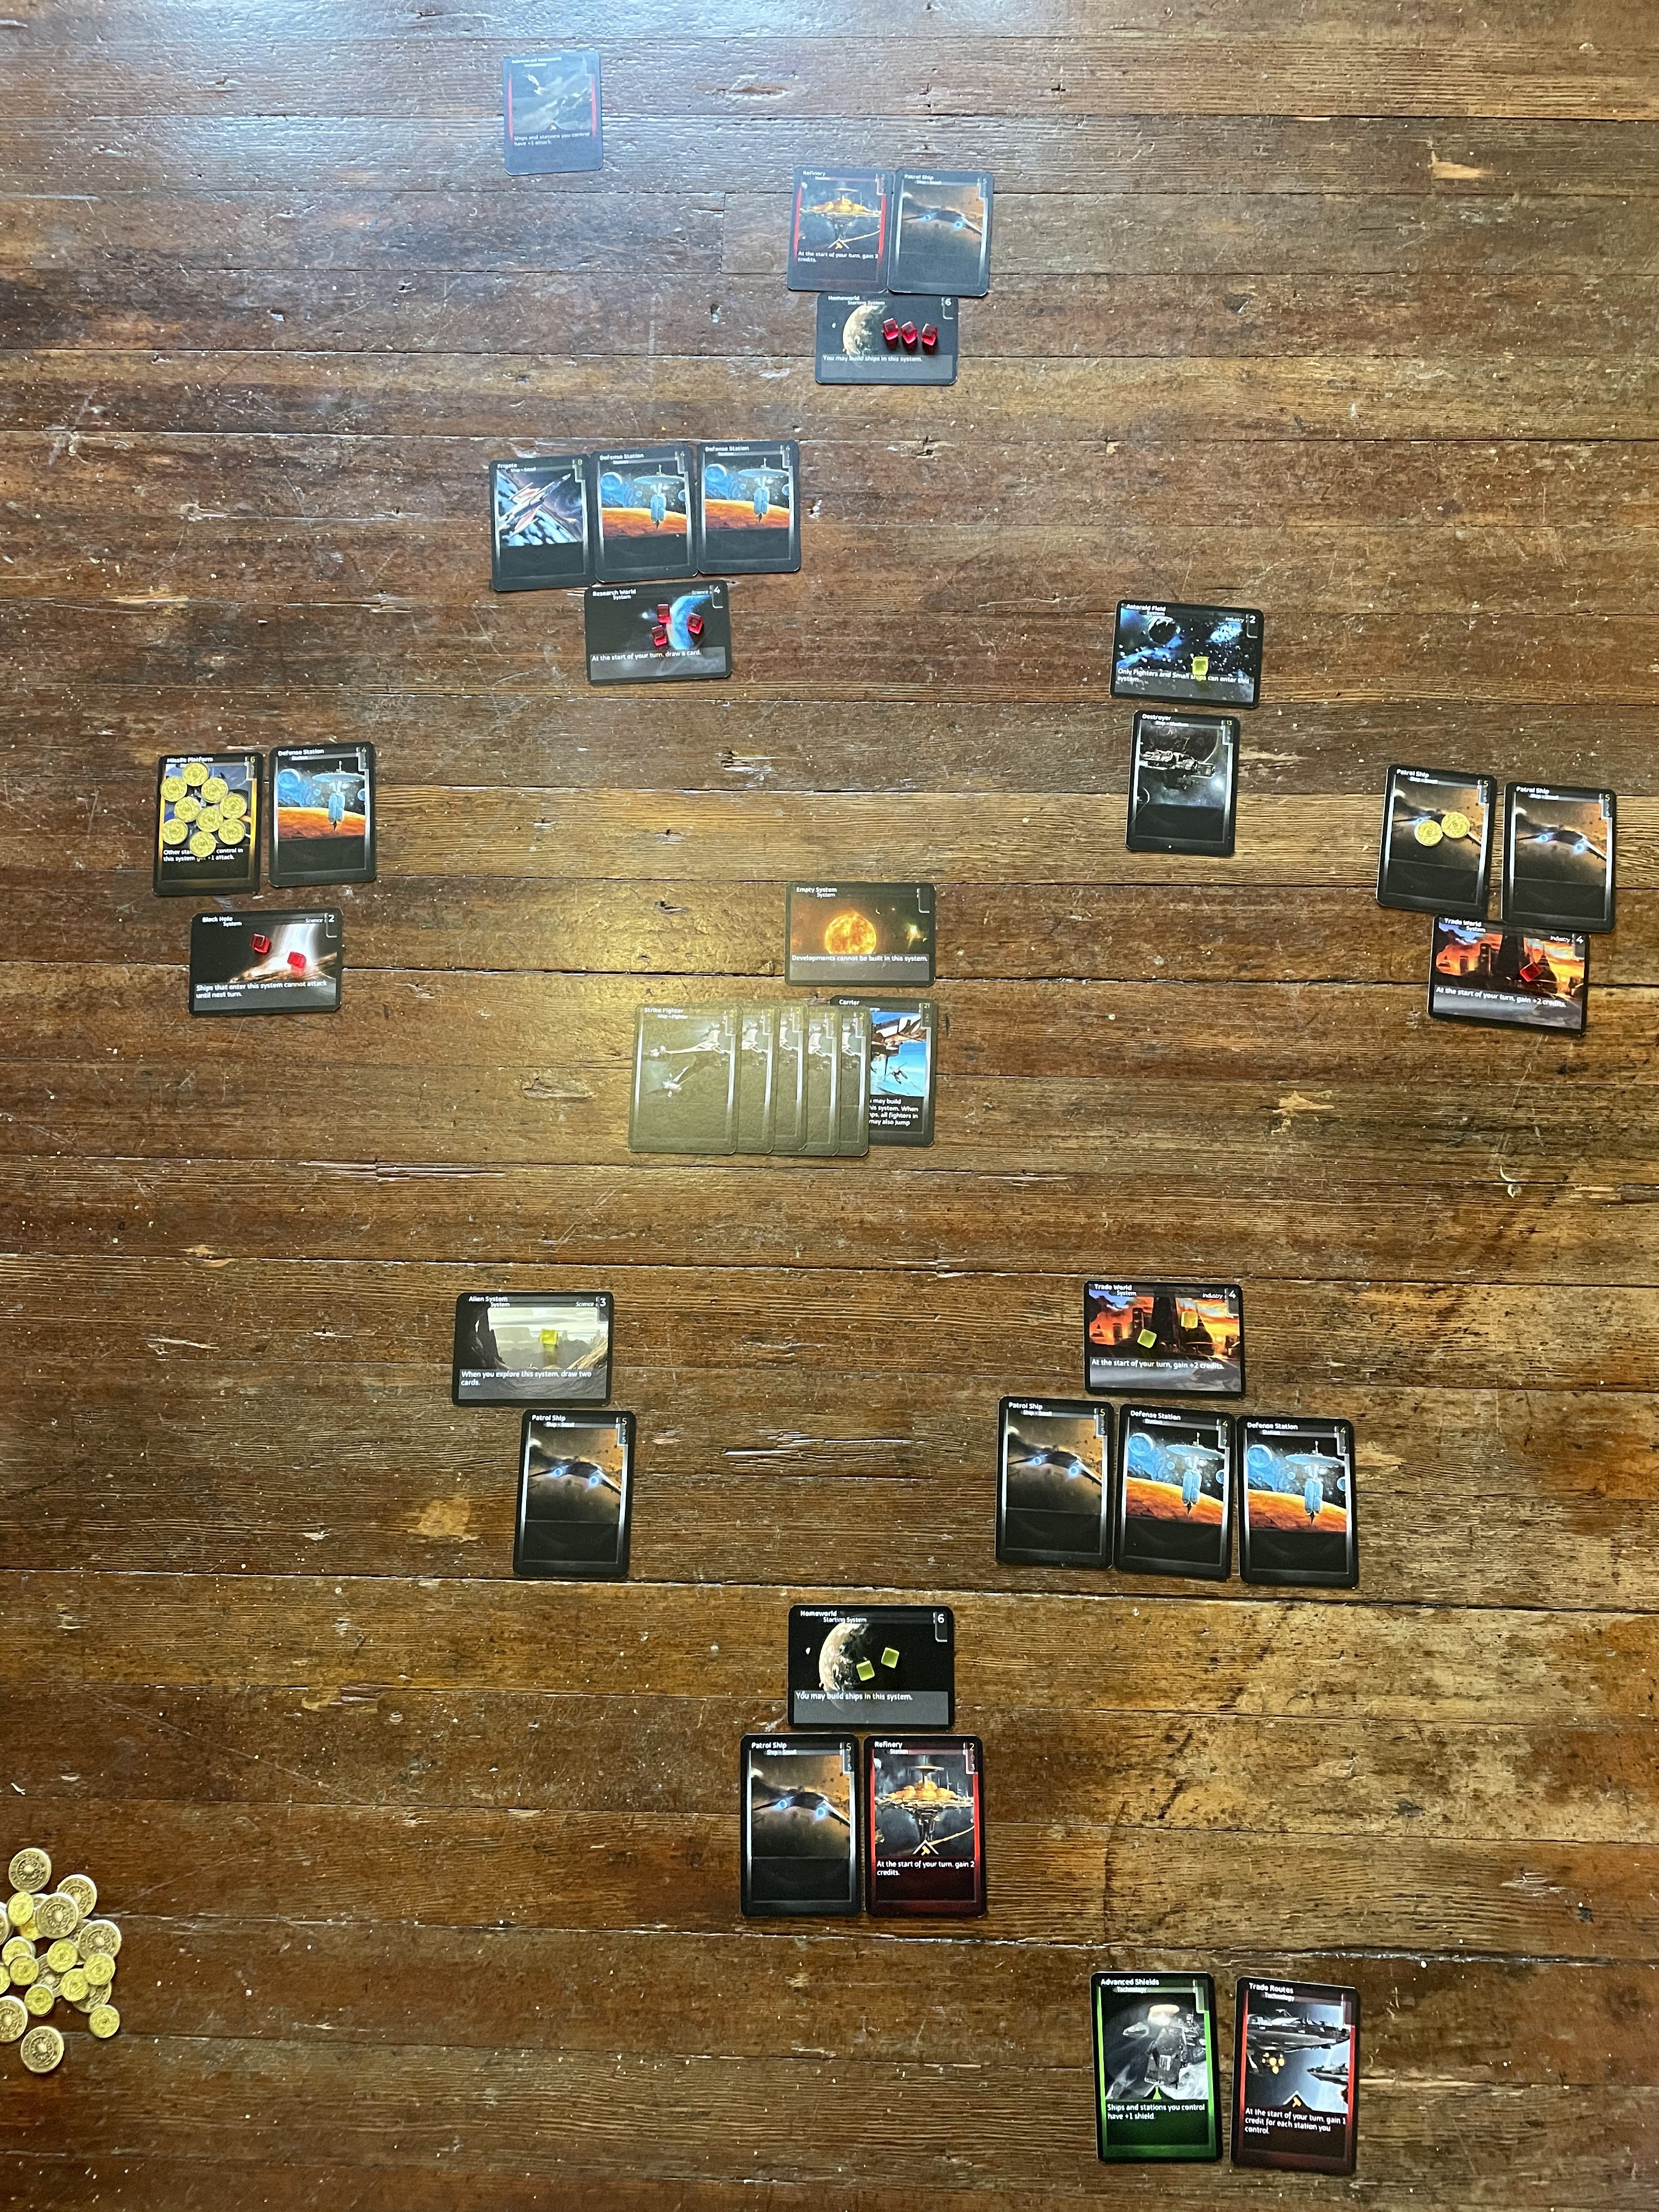 High level view of the game board. All of the system cards are now face up, with ships and stations placed around them.